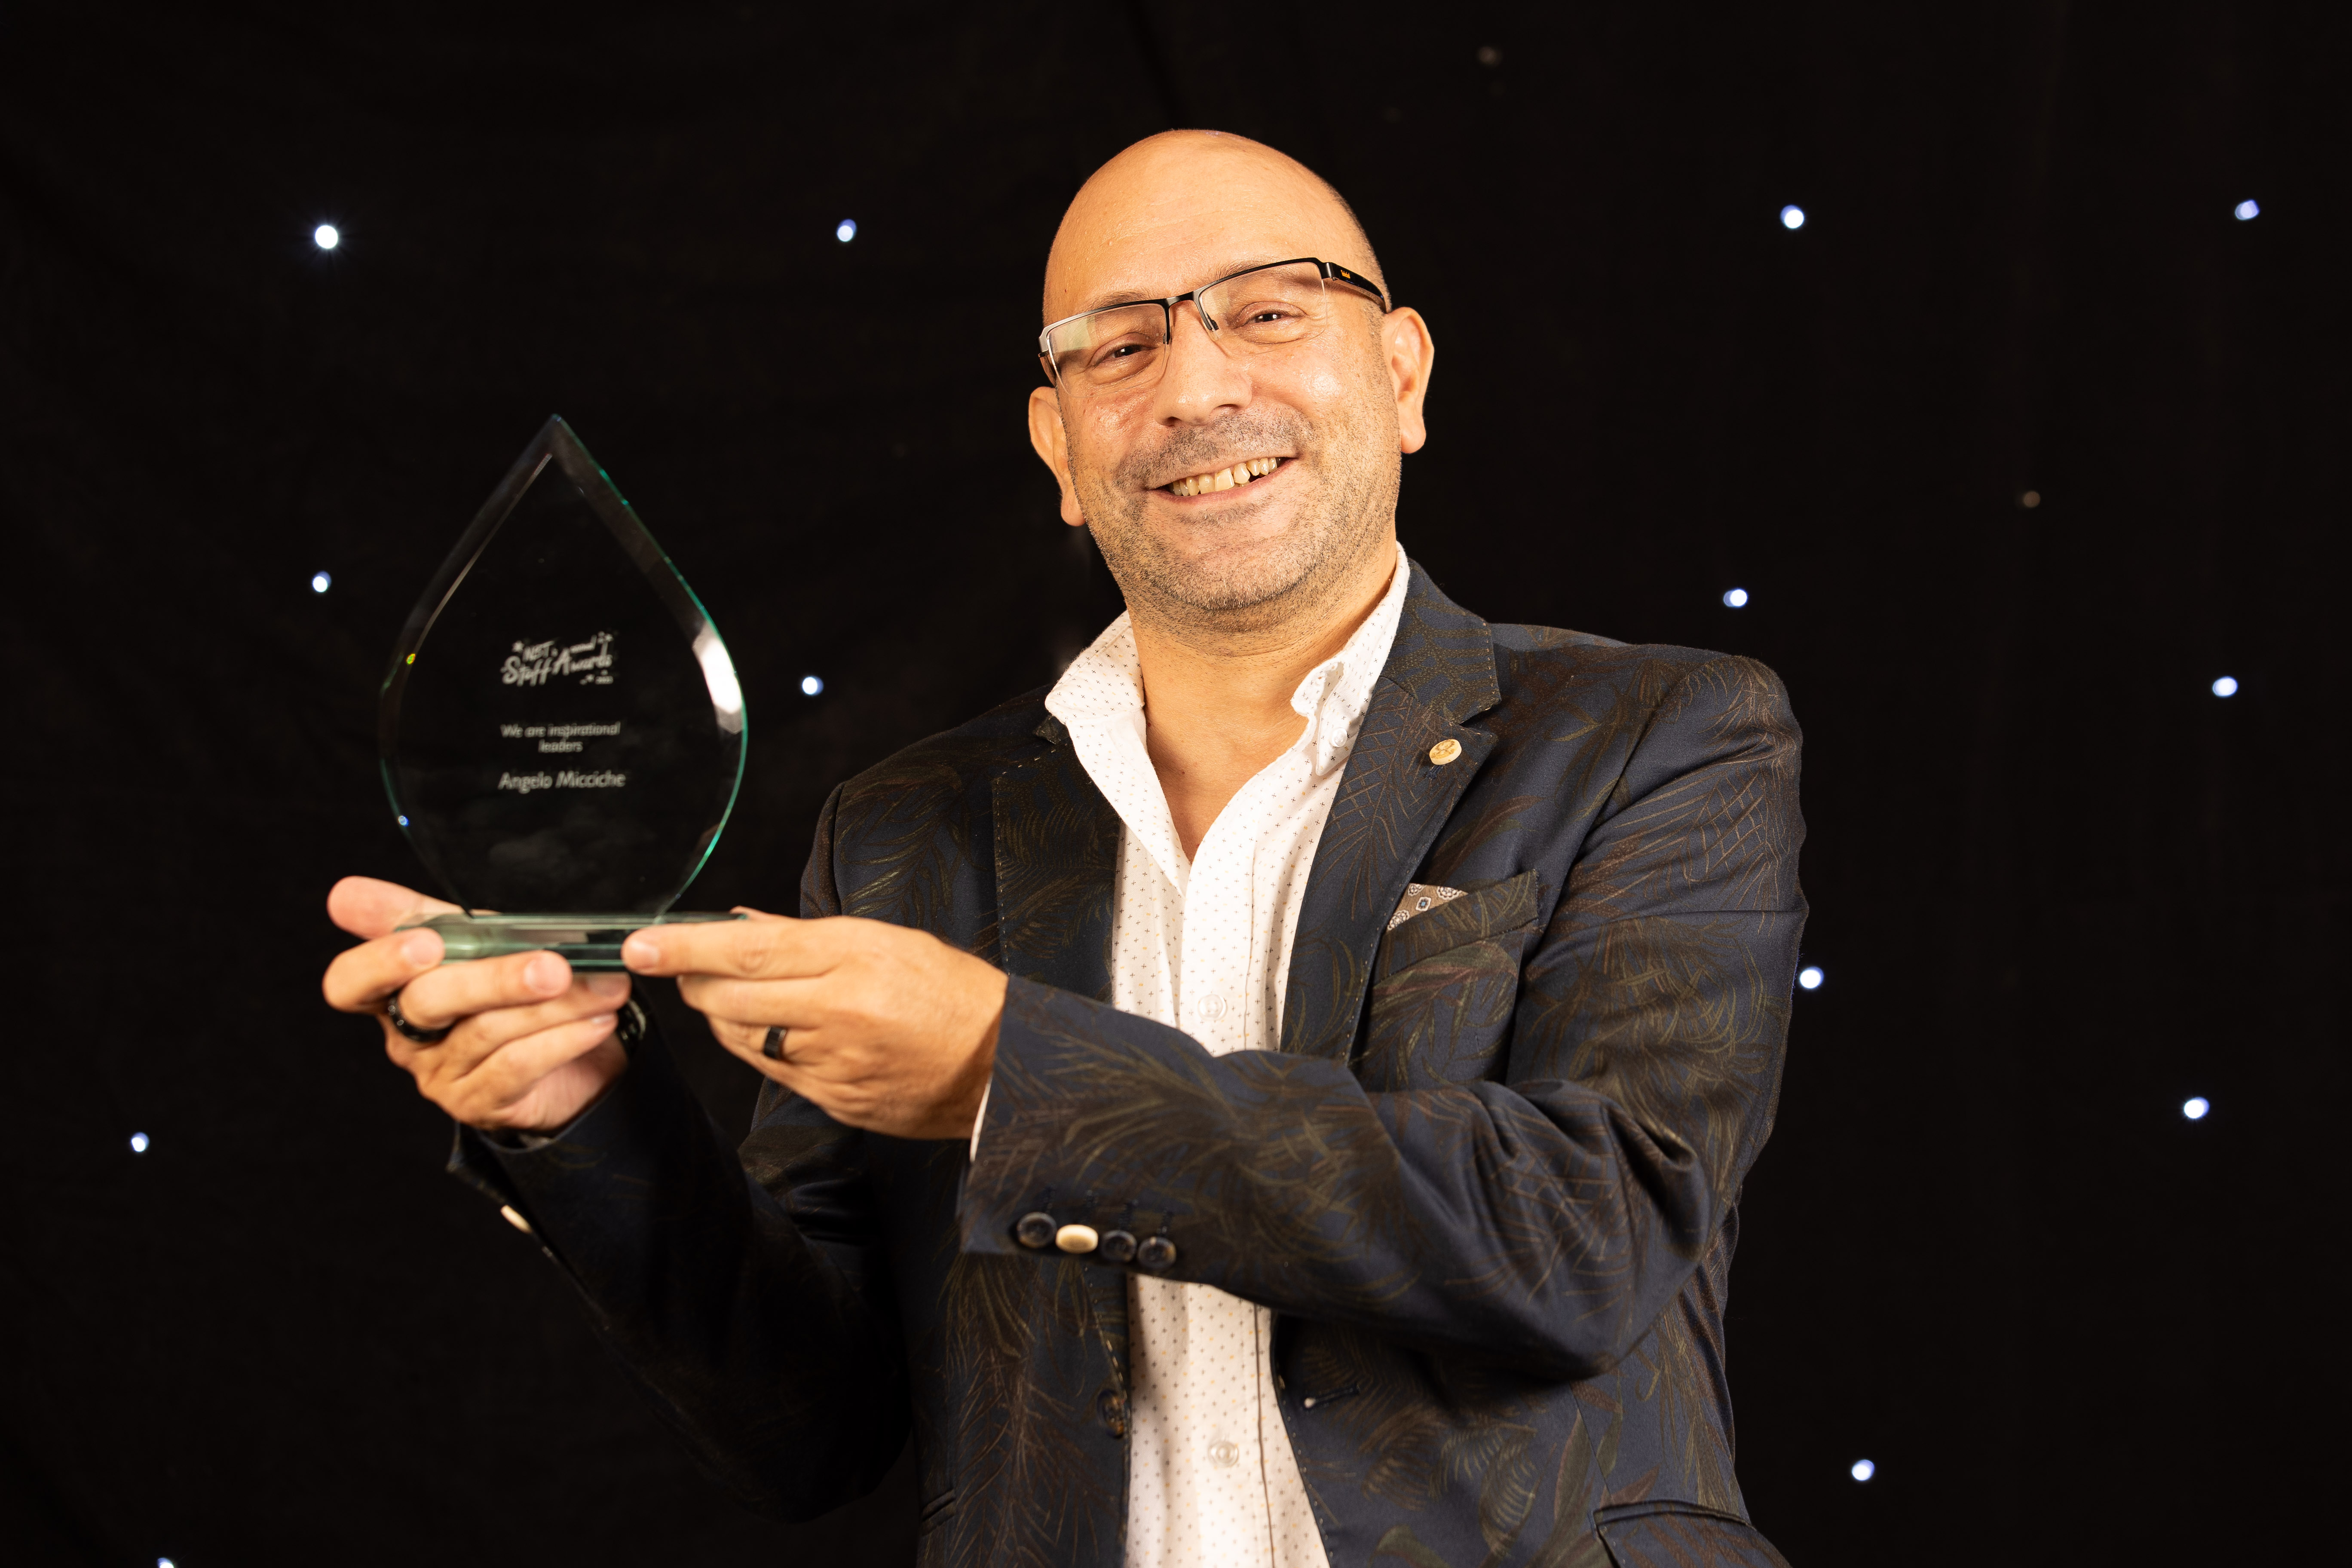 Angelo Micciche, winner of the We are inspirational leaders award